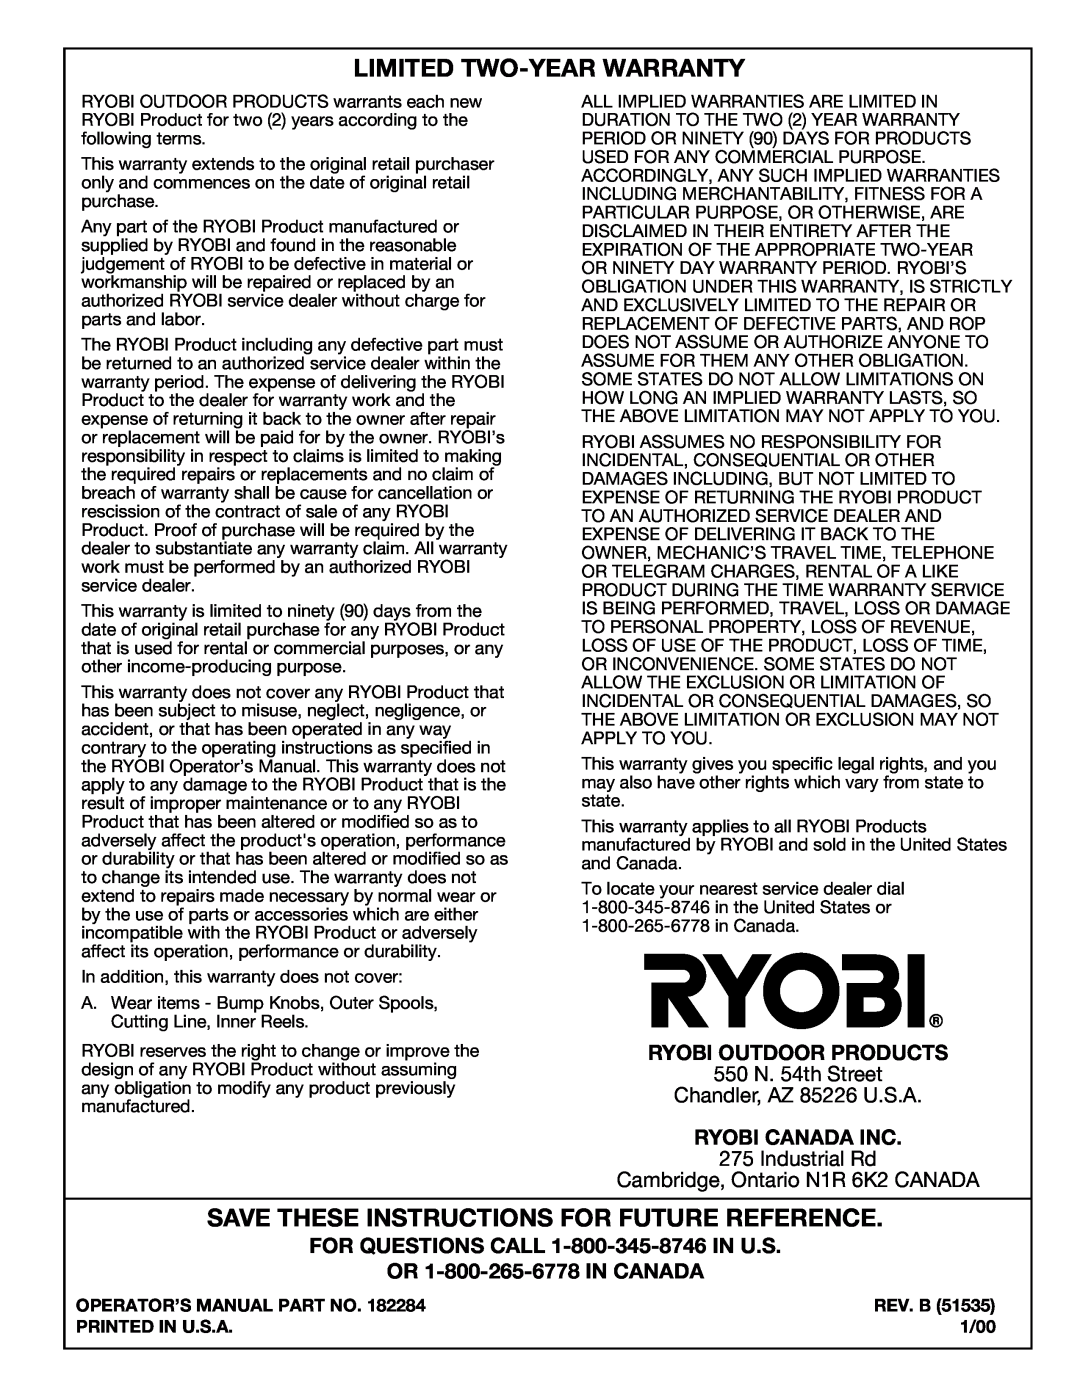 Ryobi 155r Limited Two-Yearwarranty, Save These Instructions For Future Reference, Ryobi Outdoor Products, Industrial Rd 